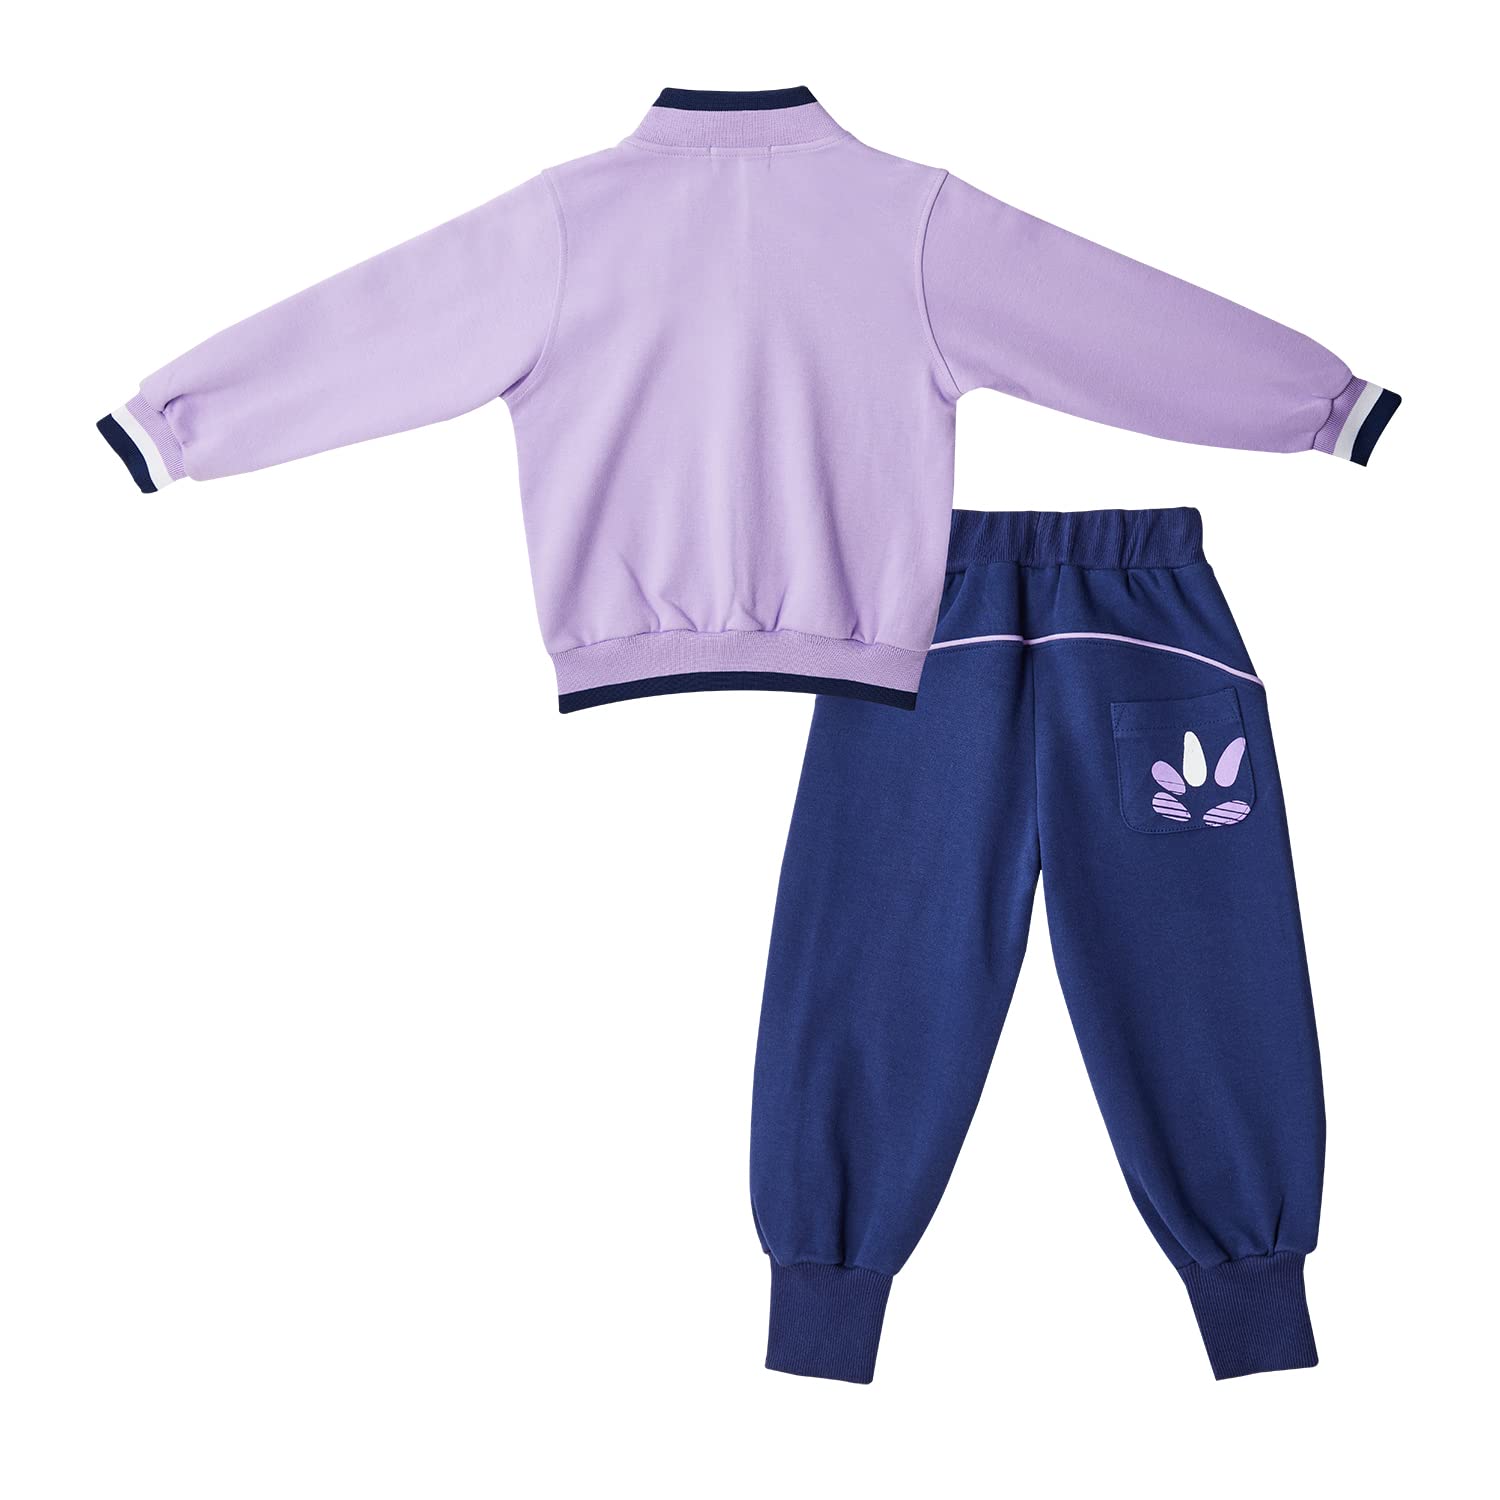 ROROANCO Activewear Kids Clothing Sets Tracksuits Active Hoodie, Pullover Jacket, Long Sleeve Shirts + Joggers 2 Piece